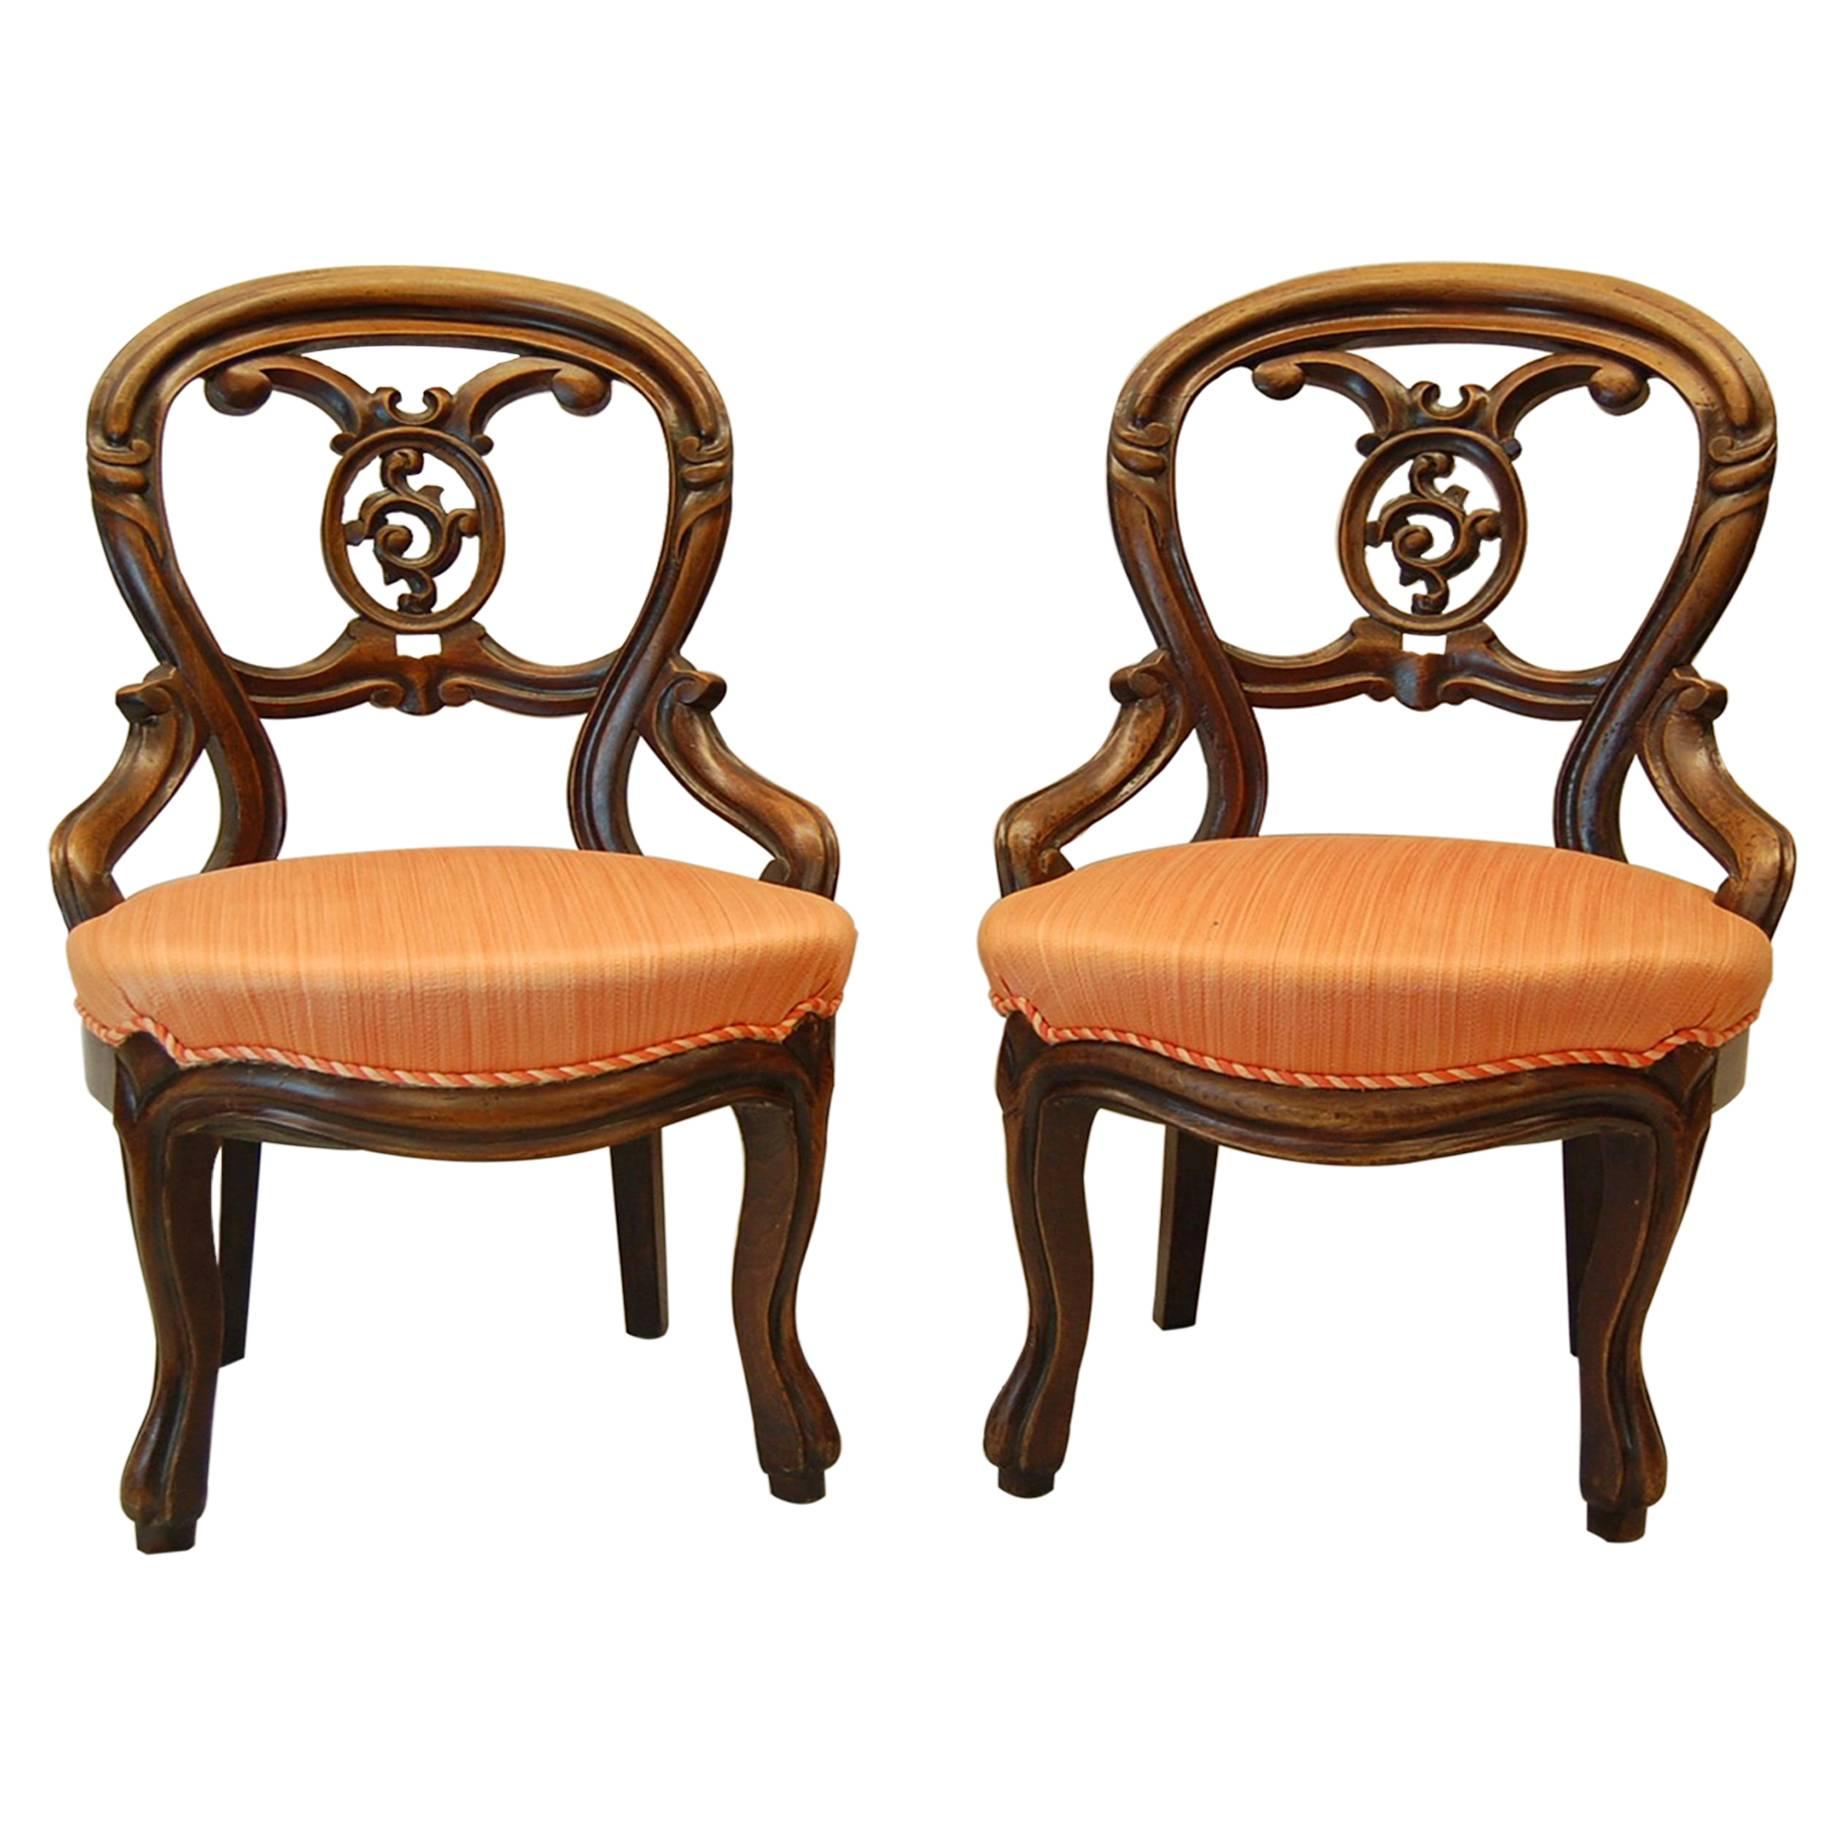 Pair Victorian Walnut Carved Parlor Chairs, circa 1870